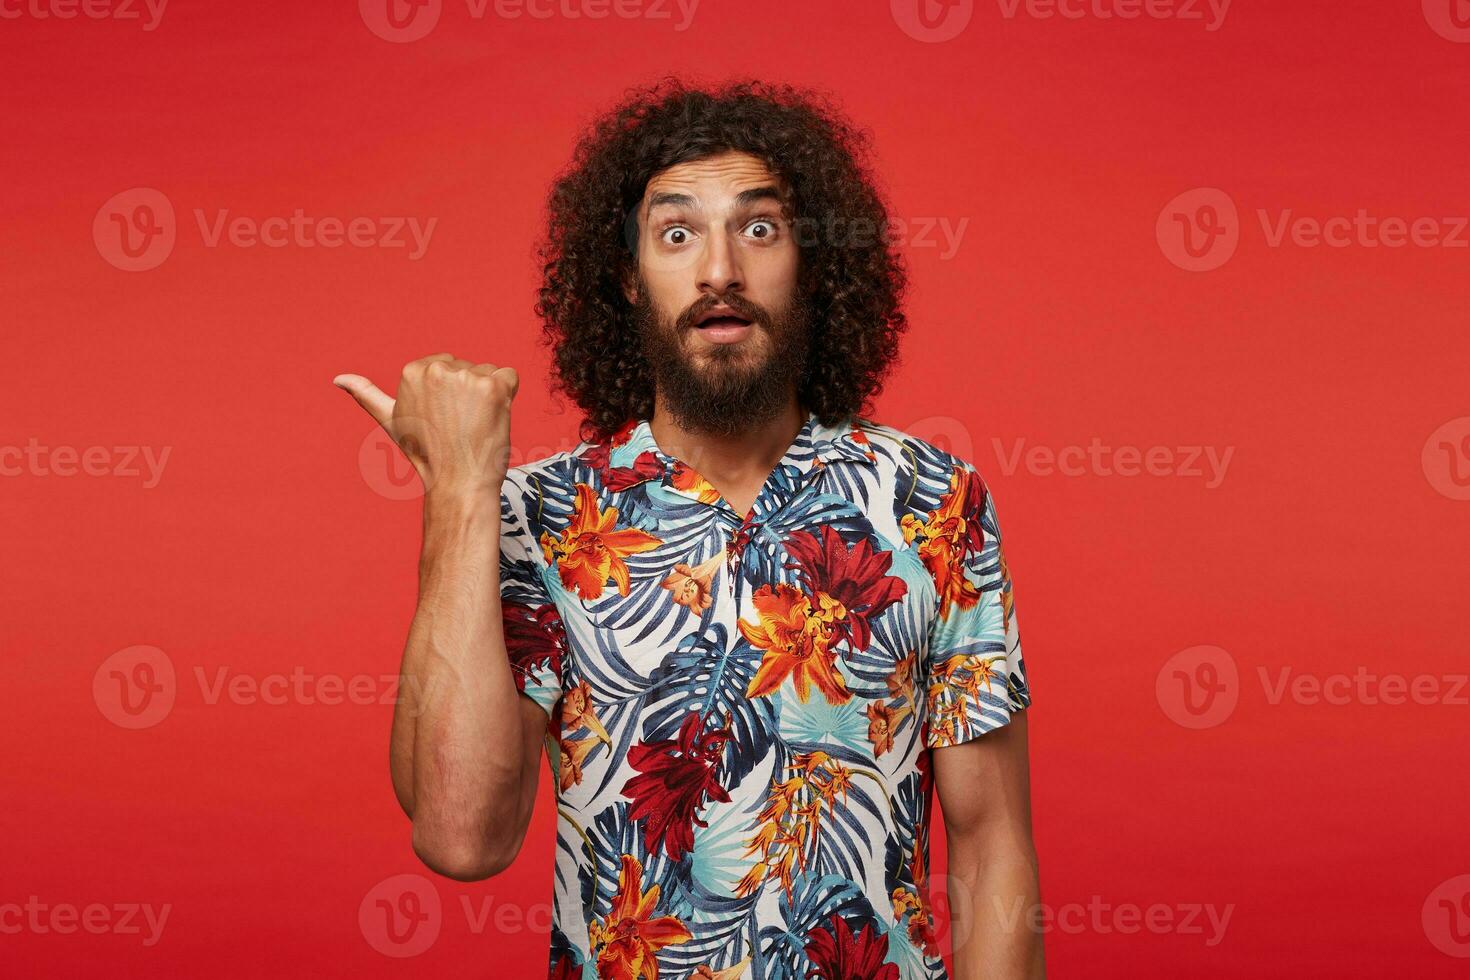 Frightened young pretty bearded man with curly brown hair rounding eyes amazedly and pointing aside with raised hand, wearing multi-colored flowered shirt while posing against red background photo